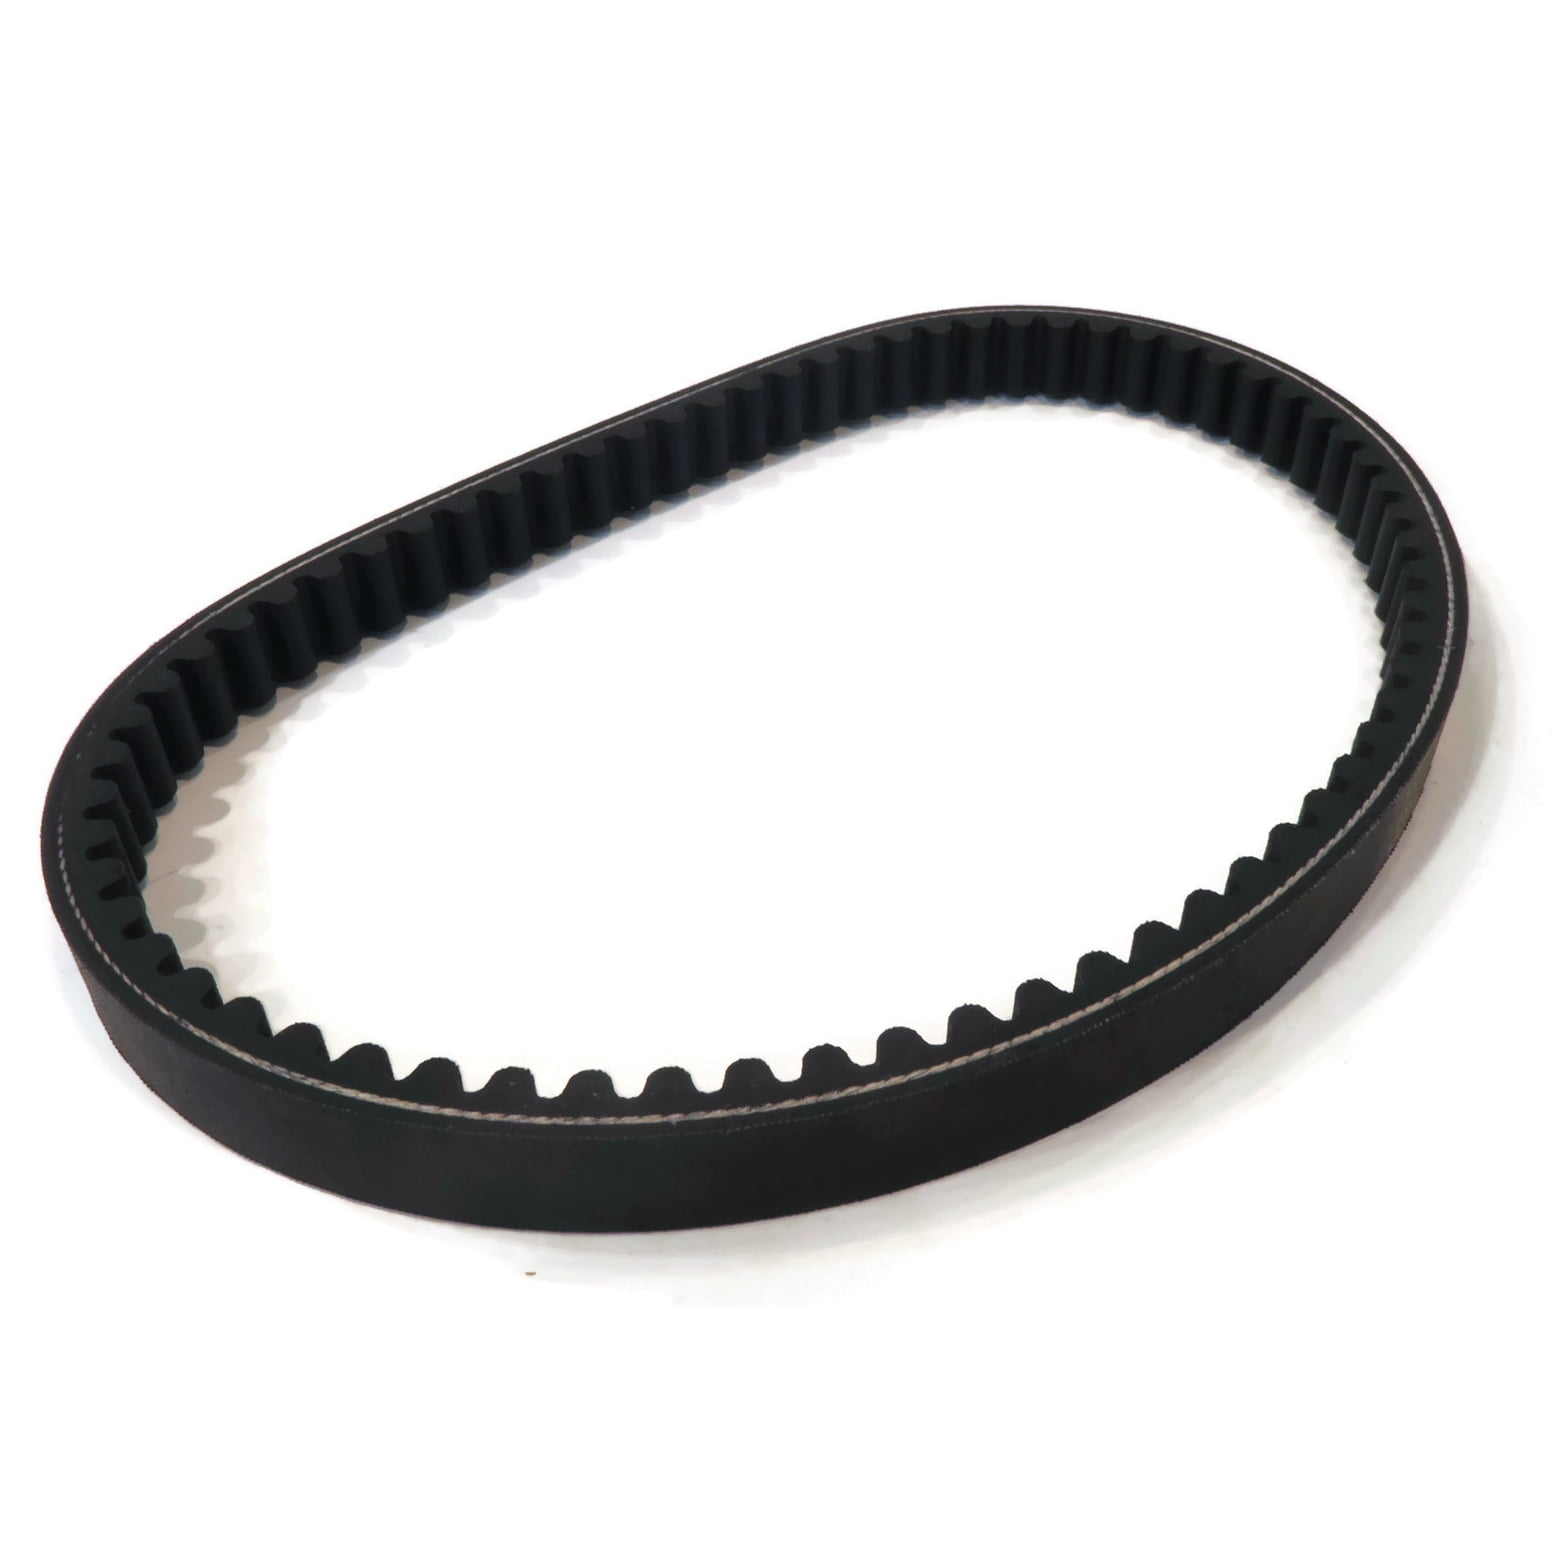 2 TORQUE CONVERTER COGGED BELTS for Stens 255-299 255299 Rotary 8487 Go Karts by The ROP Shop 